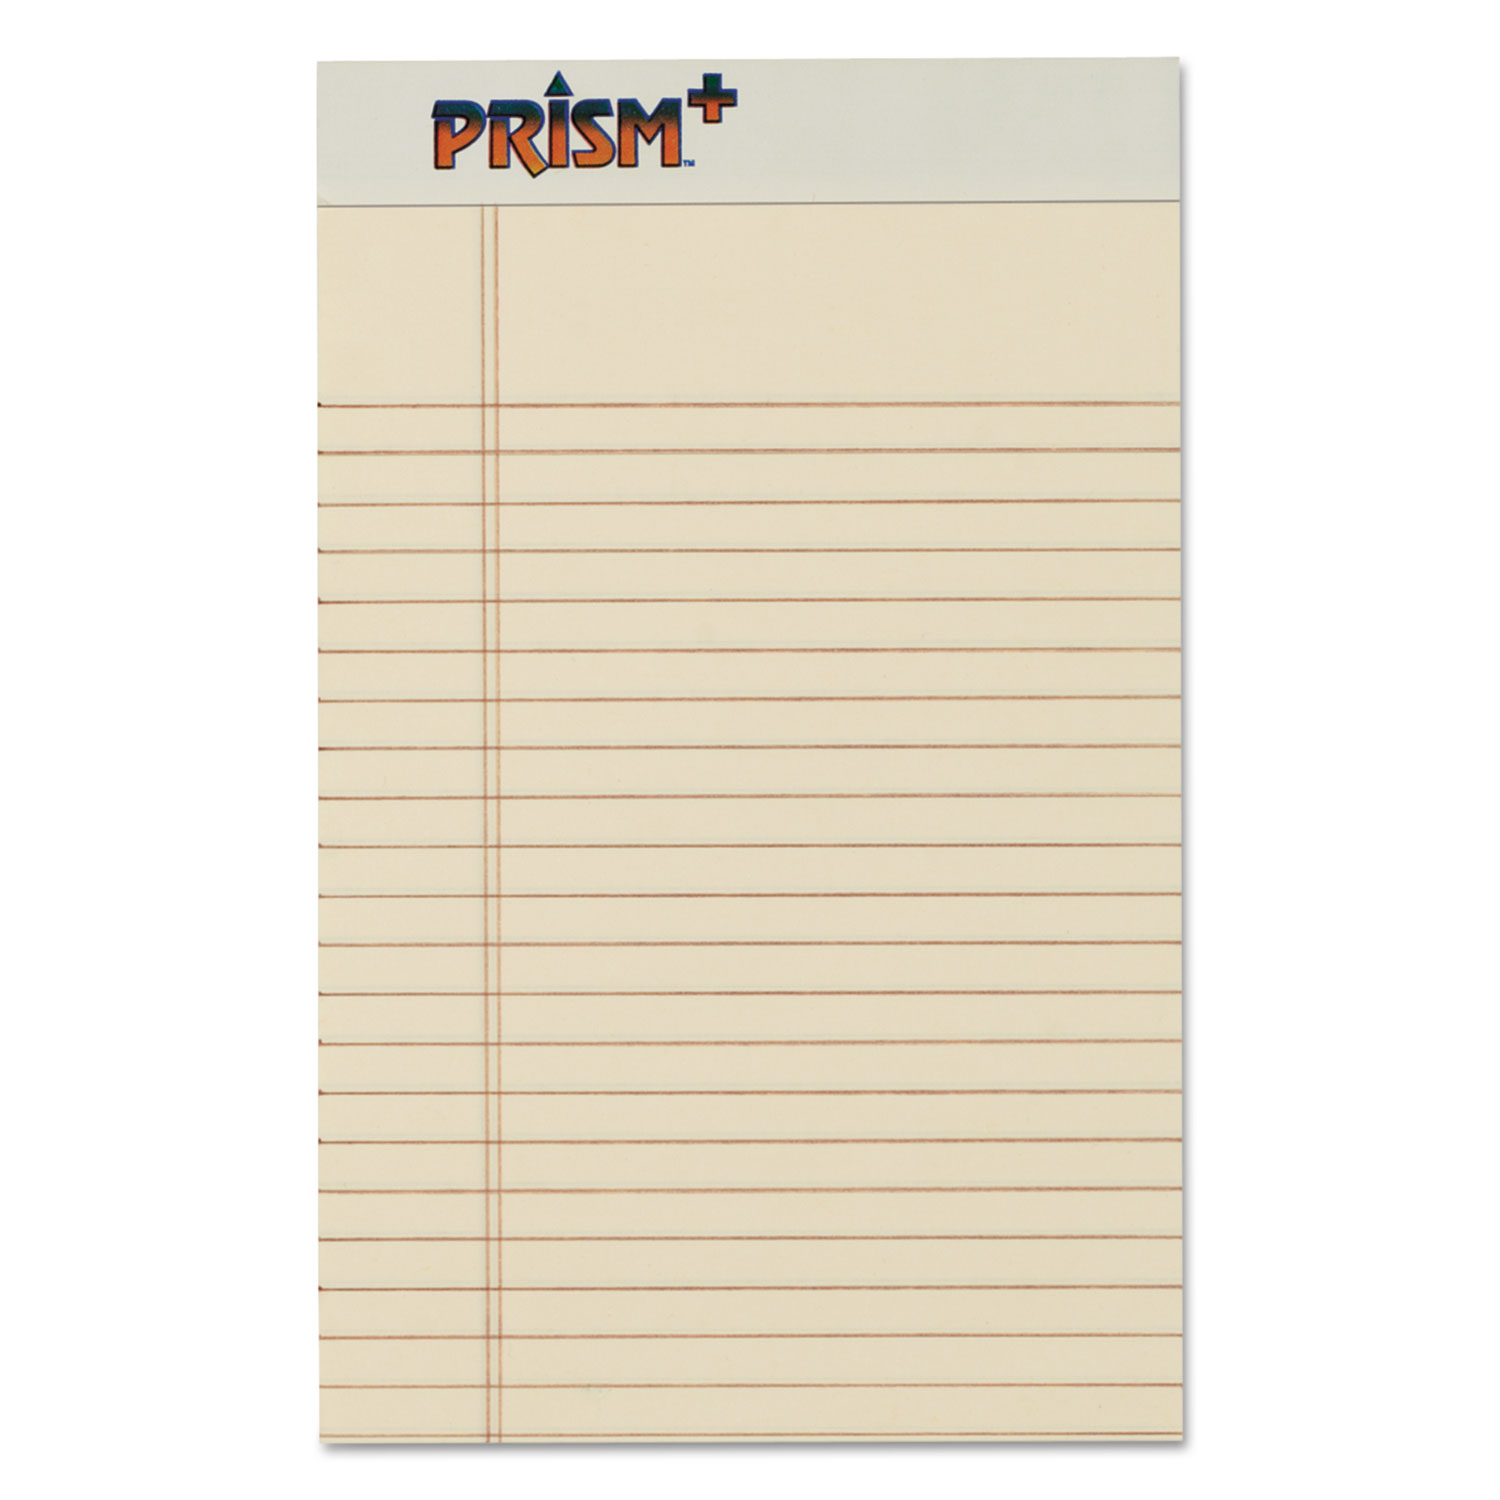  TOPS 63030 Prism + Writing Pads, Narrow Rule, 5 x 8, Pastel Ivory, 50 Sheets, 12/Pack (TOP63030) 